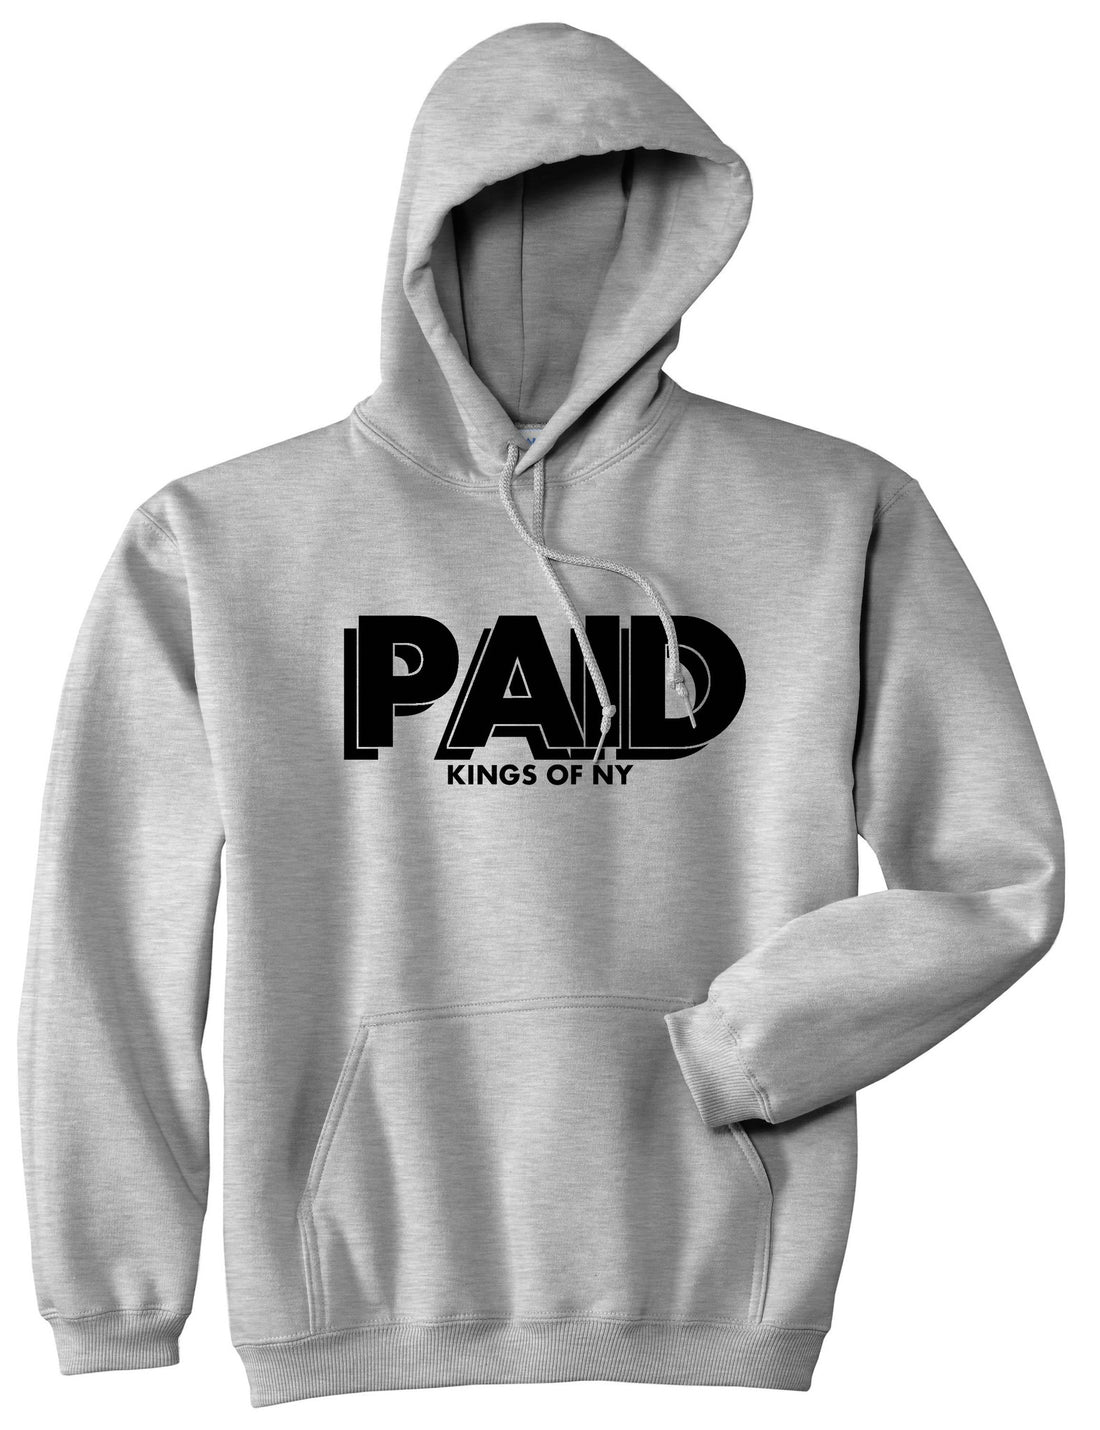 PAID Kings Of NY W15 Pullover Hoodie in Grey By Kings Of NY